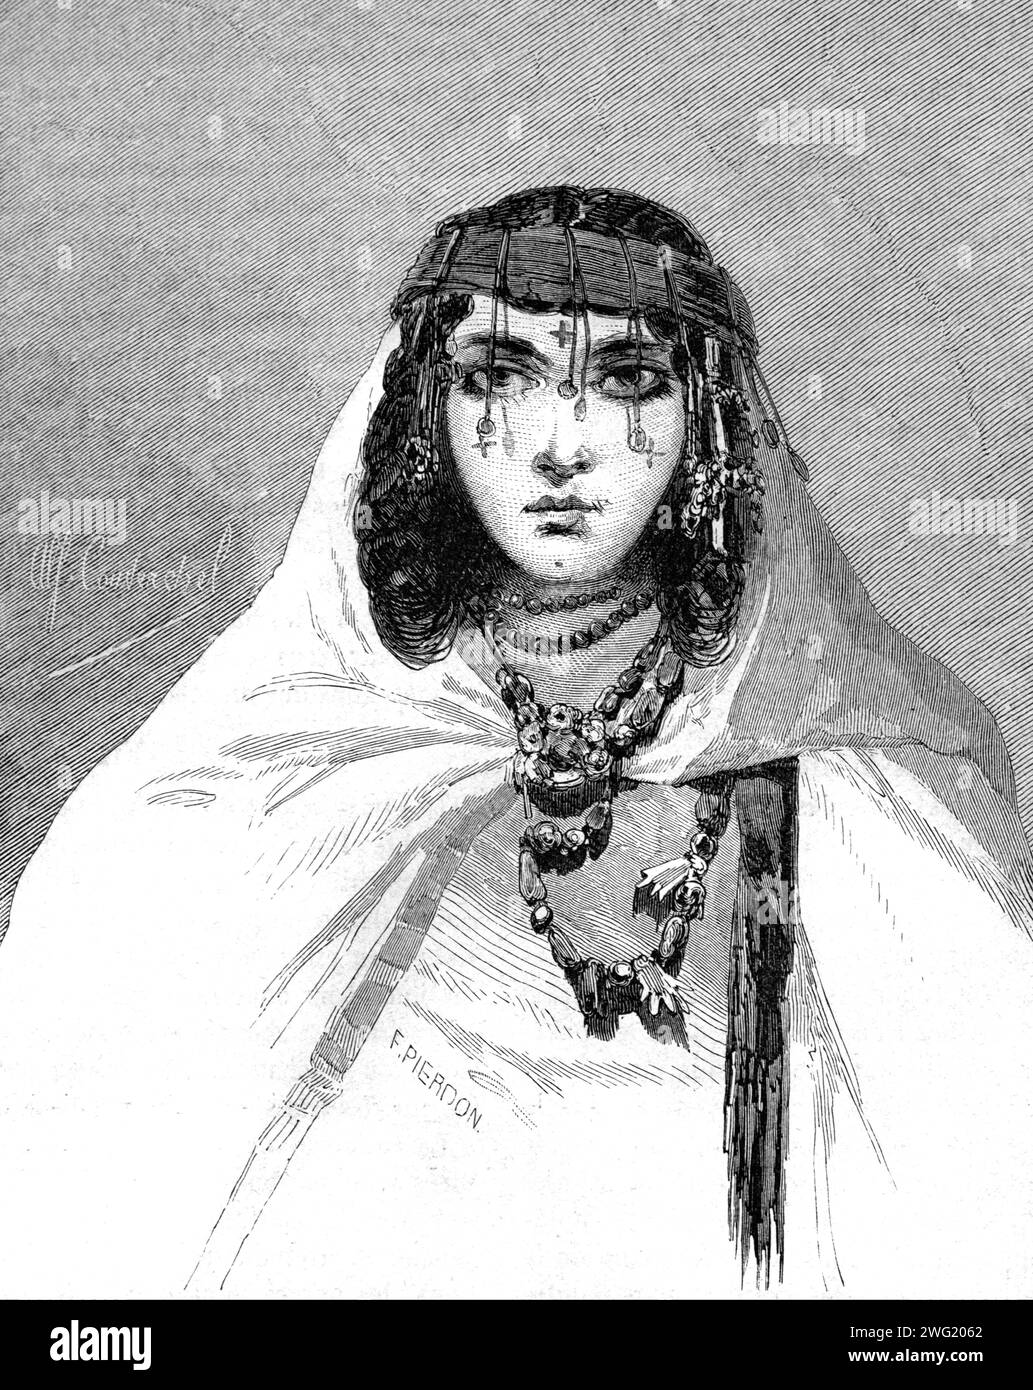 Portrait of Young Arab Woman wearing Ethnic Dress, Traditional Costume or Folk Costume including Headdress and Shawl, Metlili, Algeria. Vintage or Historic Engraving or Illustration 1863 Stock Photo